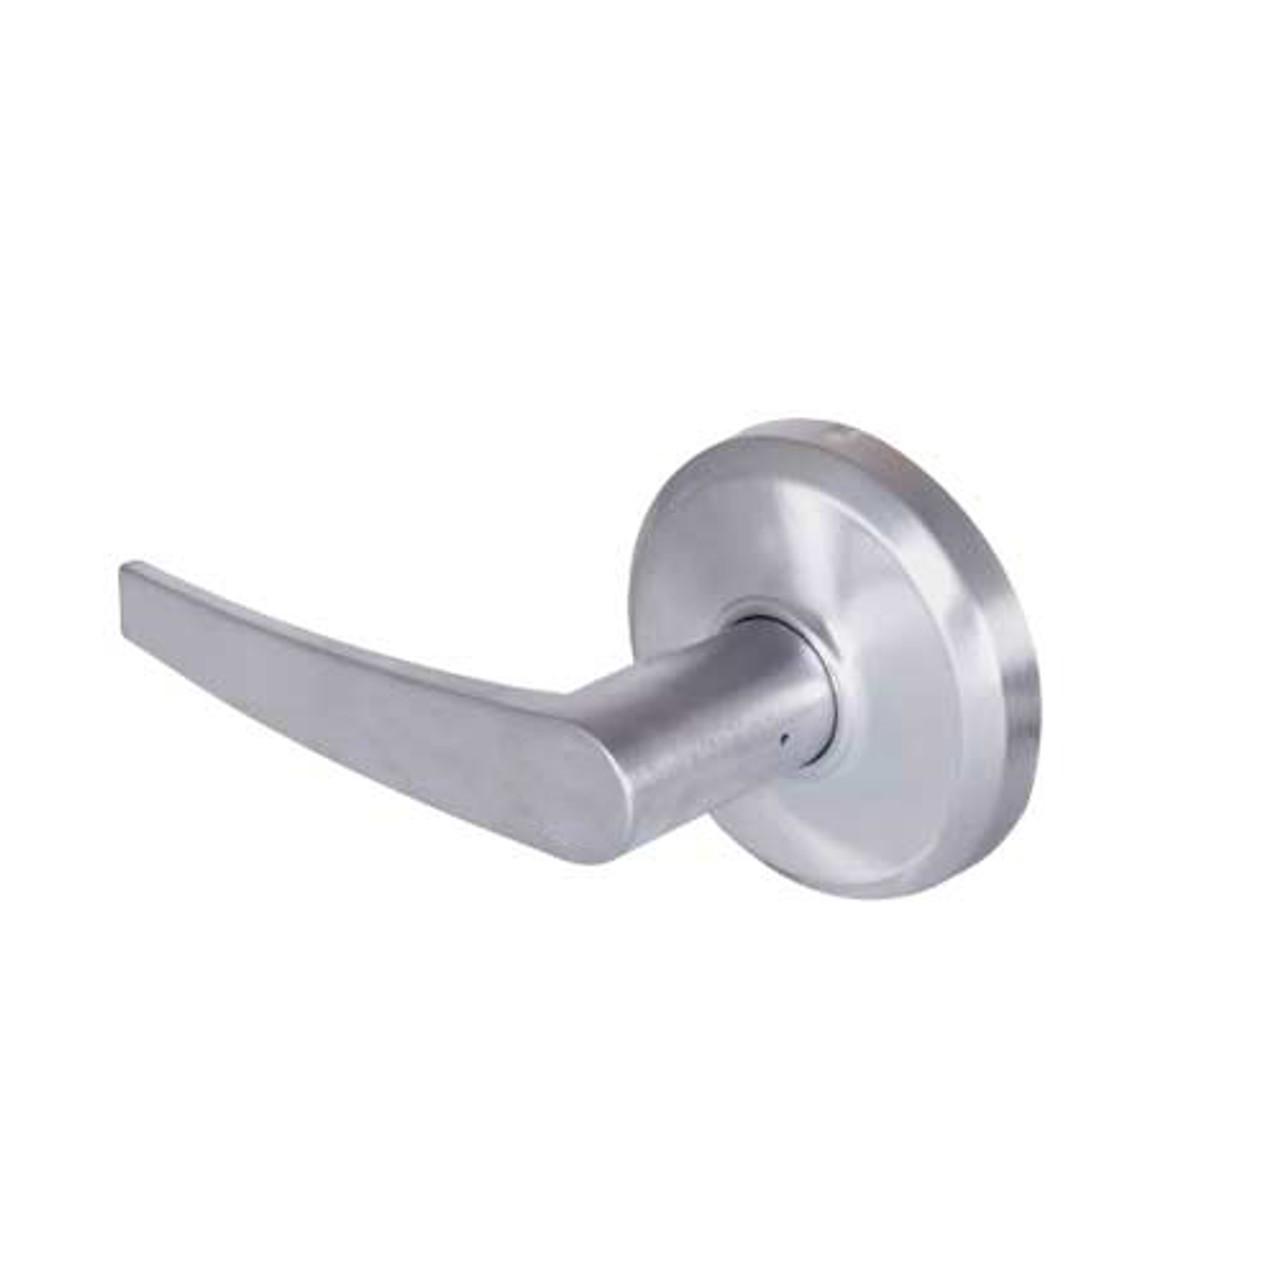 QCL235A626NR4NOS Stanley QCL200 Series Cylindrical Communicating Lock with Slate Lever in Satin Chrome Finish